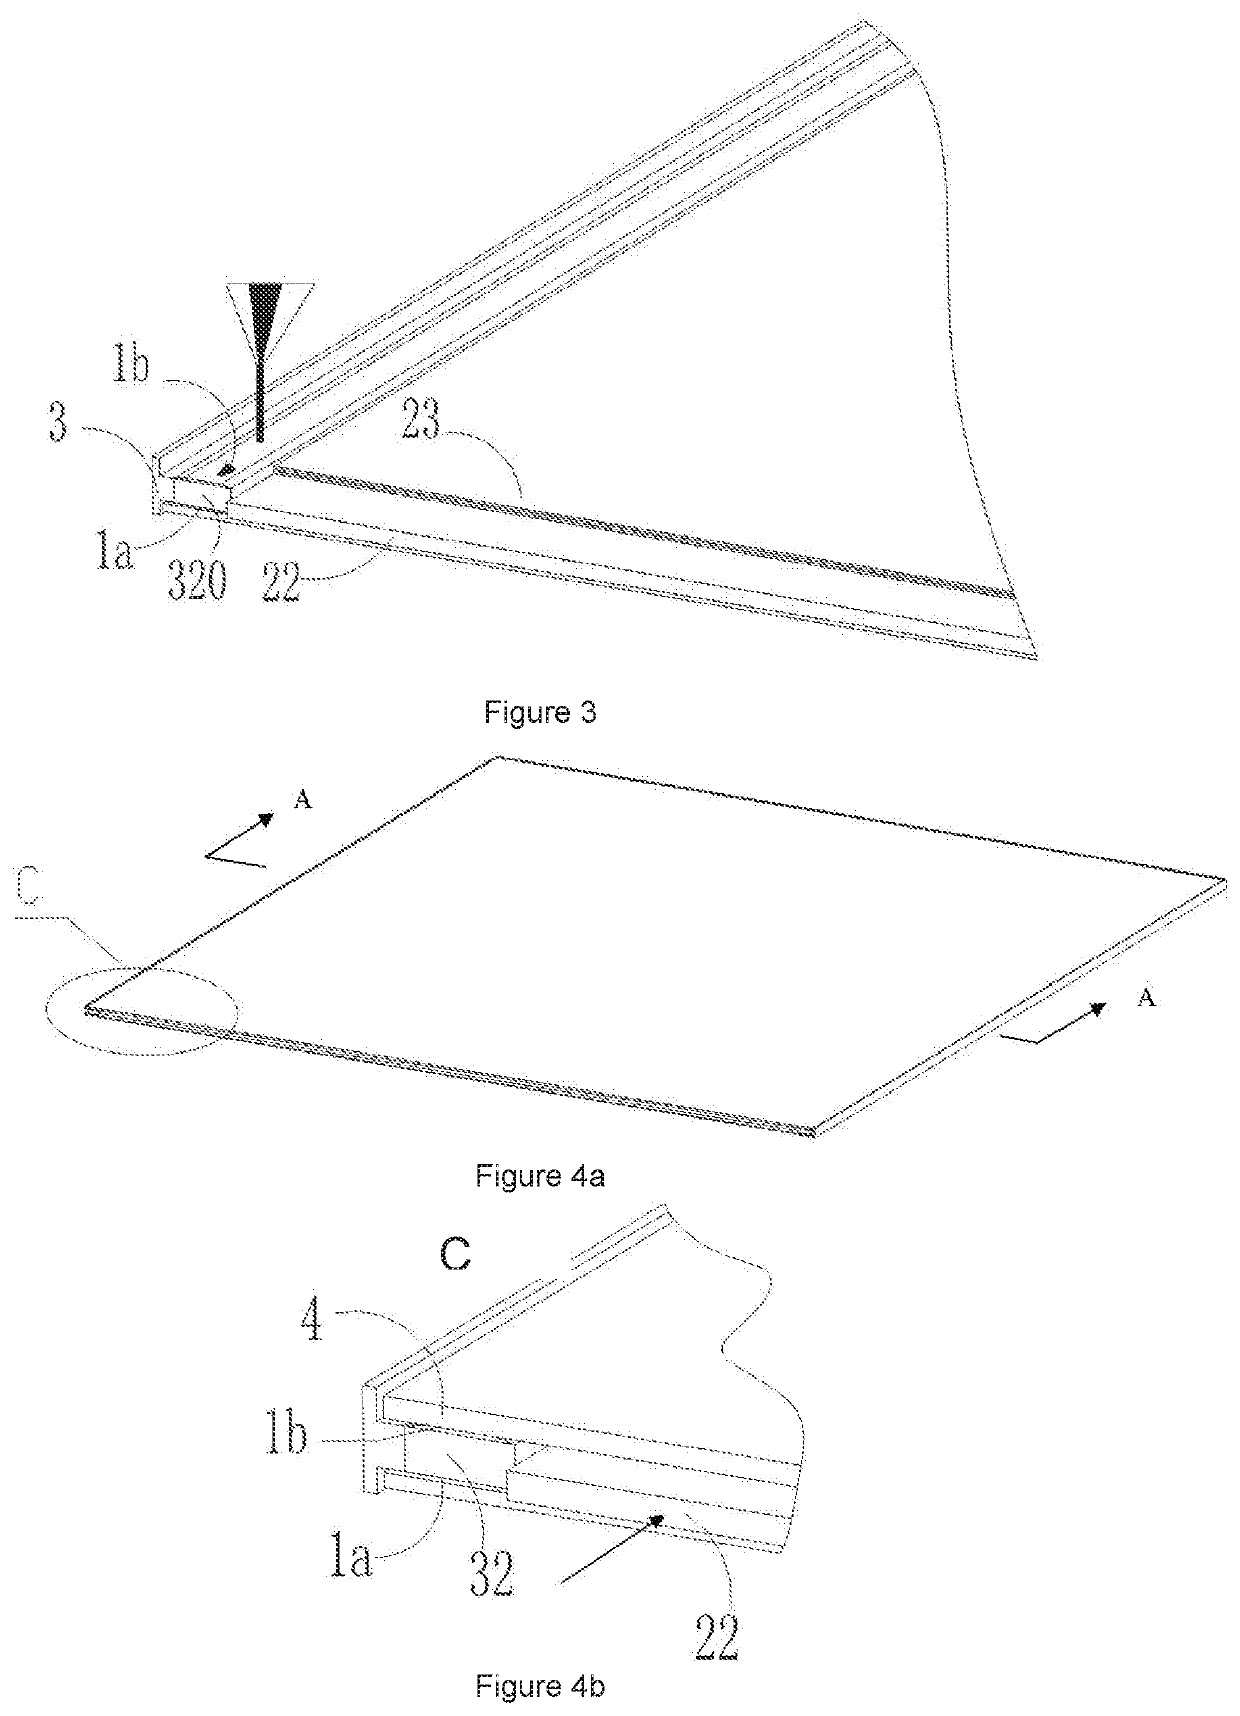 Manufacturing method of display module suitable for fast curing of glue and easy for rework